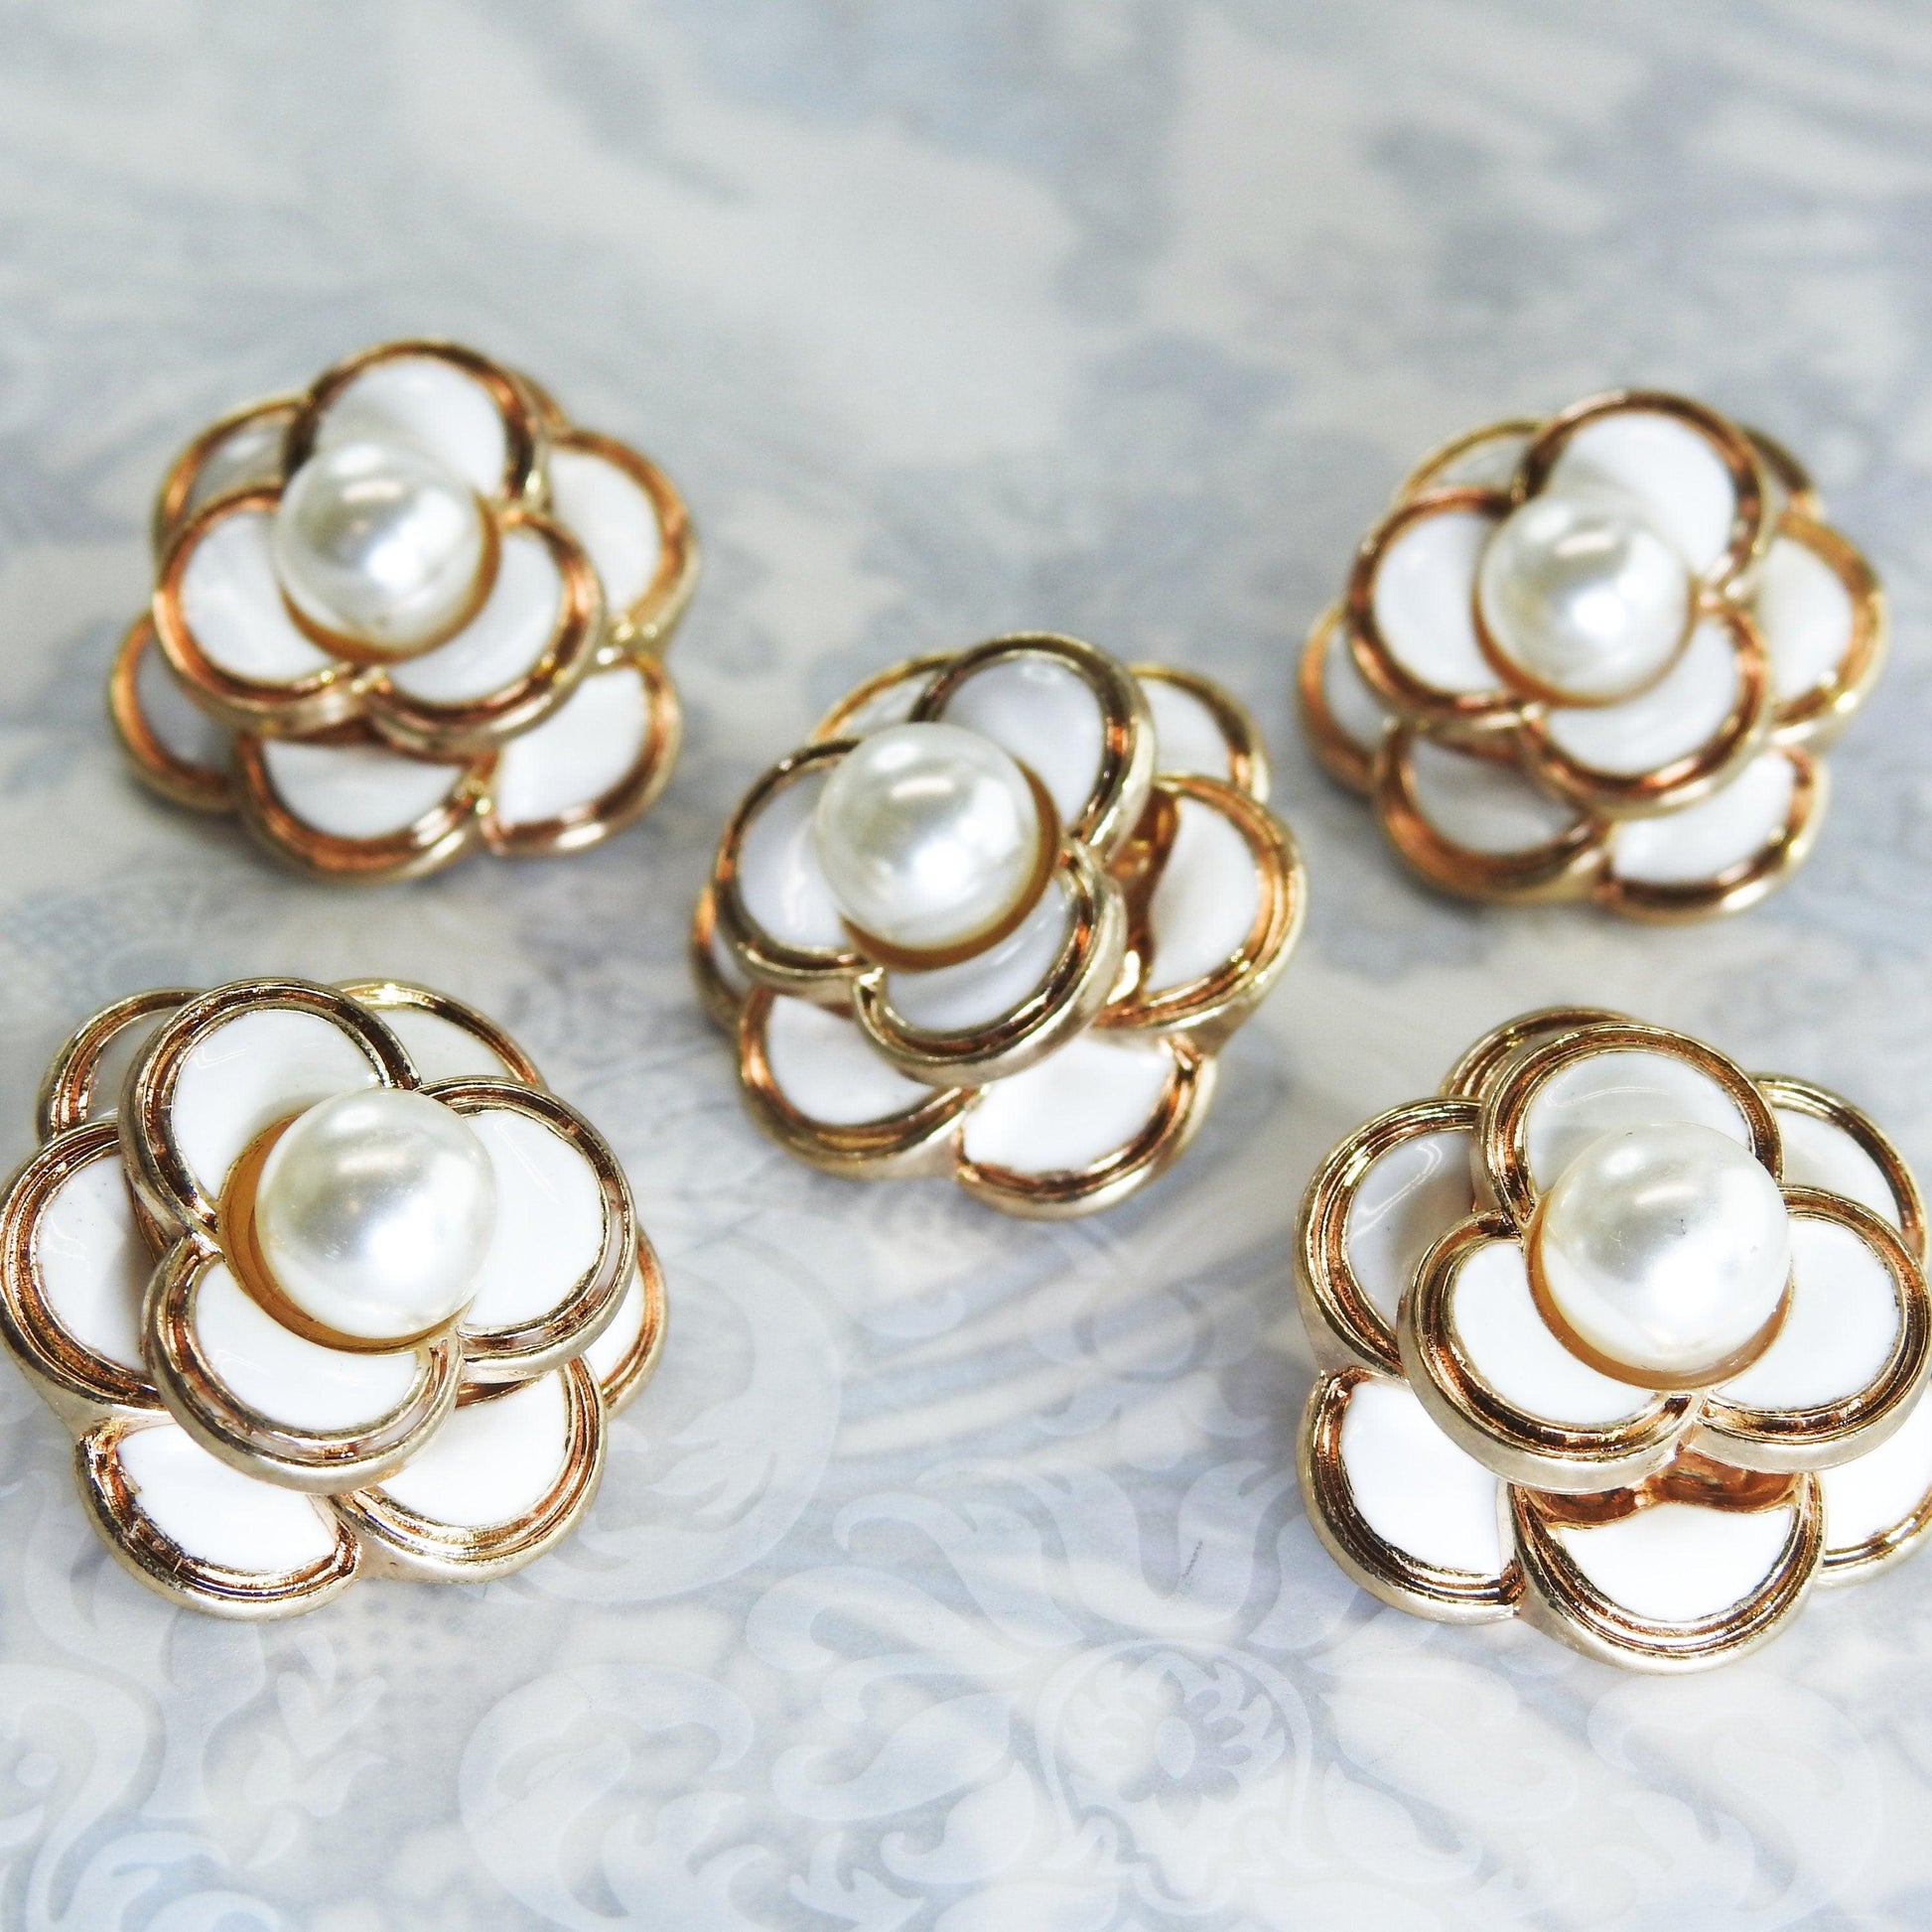 24mm Metal Shank Buttons, Pearl Buttons, Vintage Style Buttons